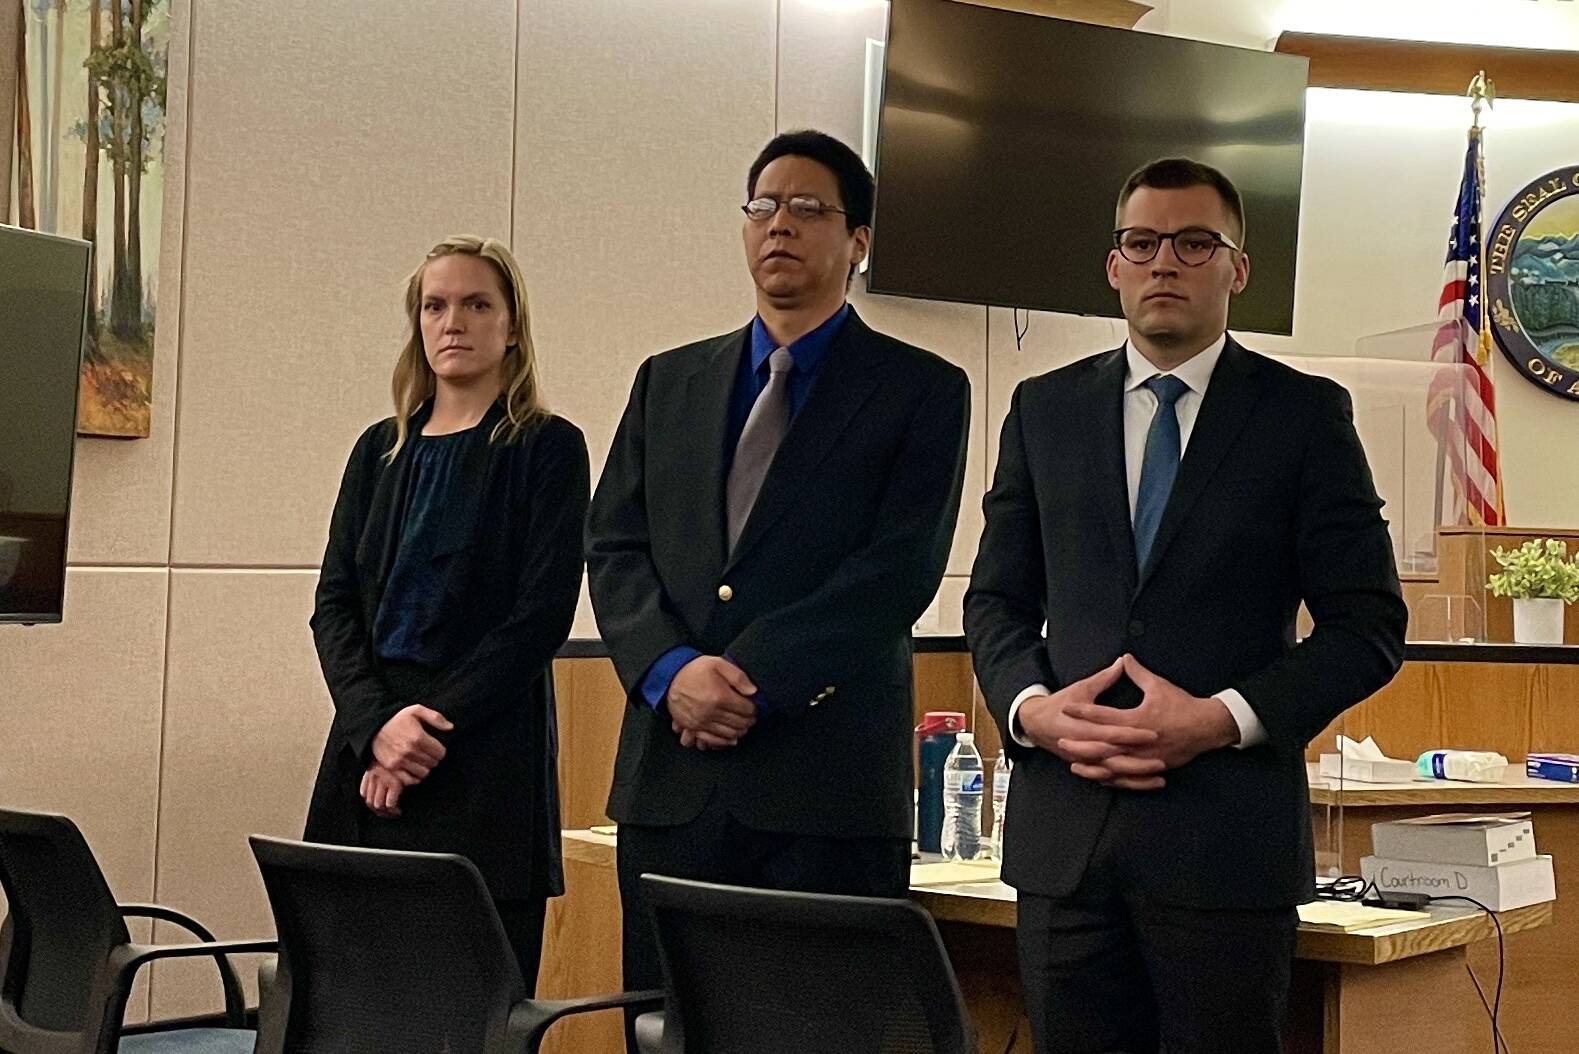 Michael S. Lockett / Juneau Empire
Left to right, investigator Emily Chapel, defendant Fenton Jacobs and defense attorney Nicolas Ambrose stand as the jury in Jacobs’ trial enters the courtroom on May 18, 2022.